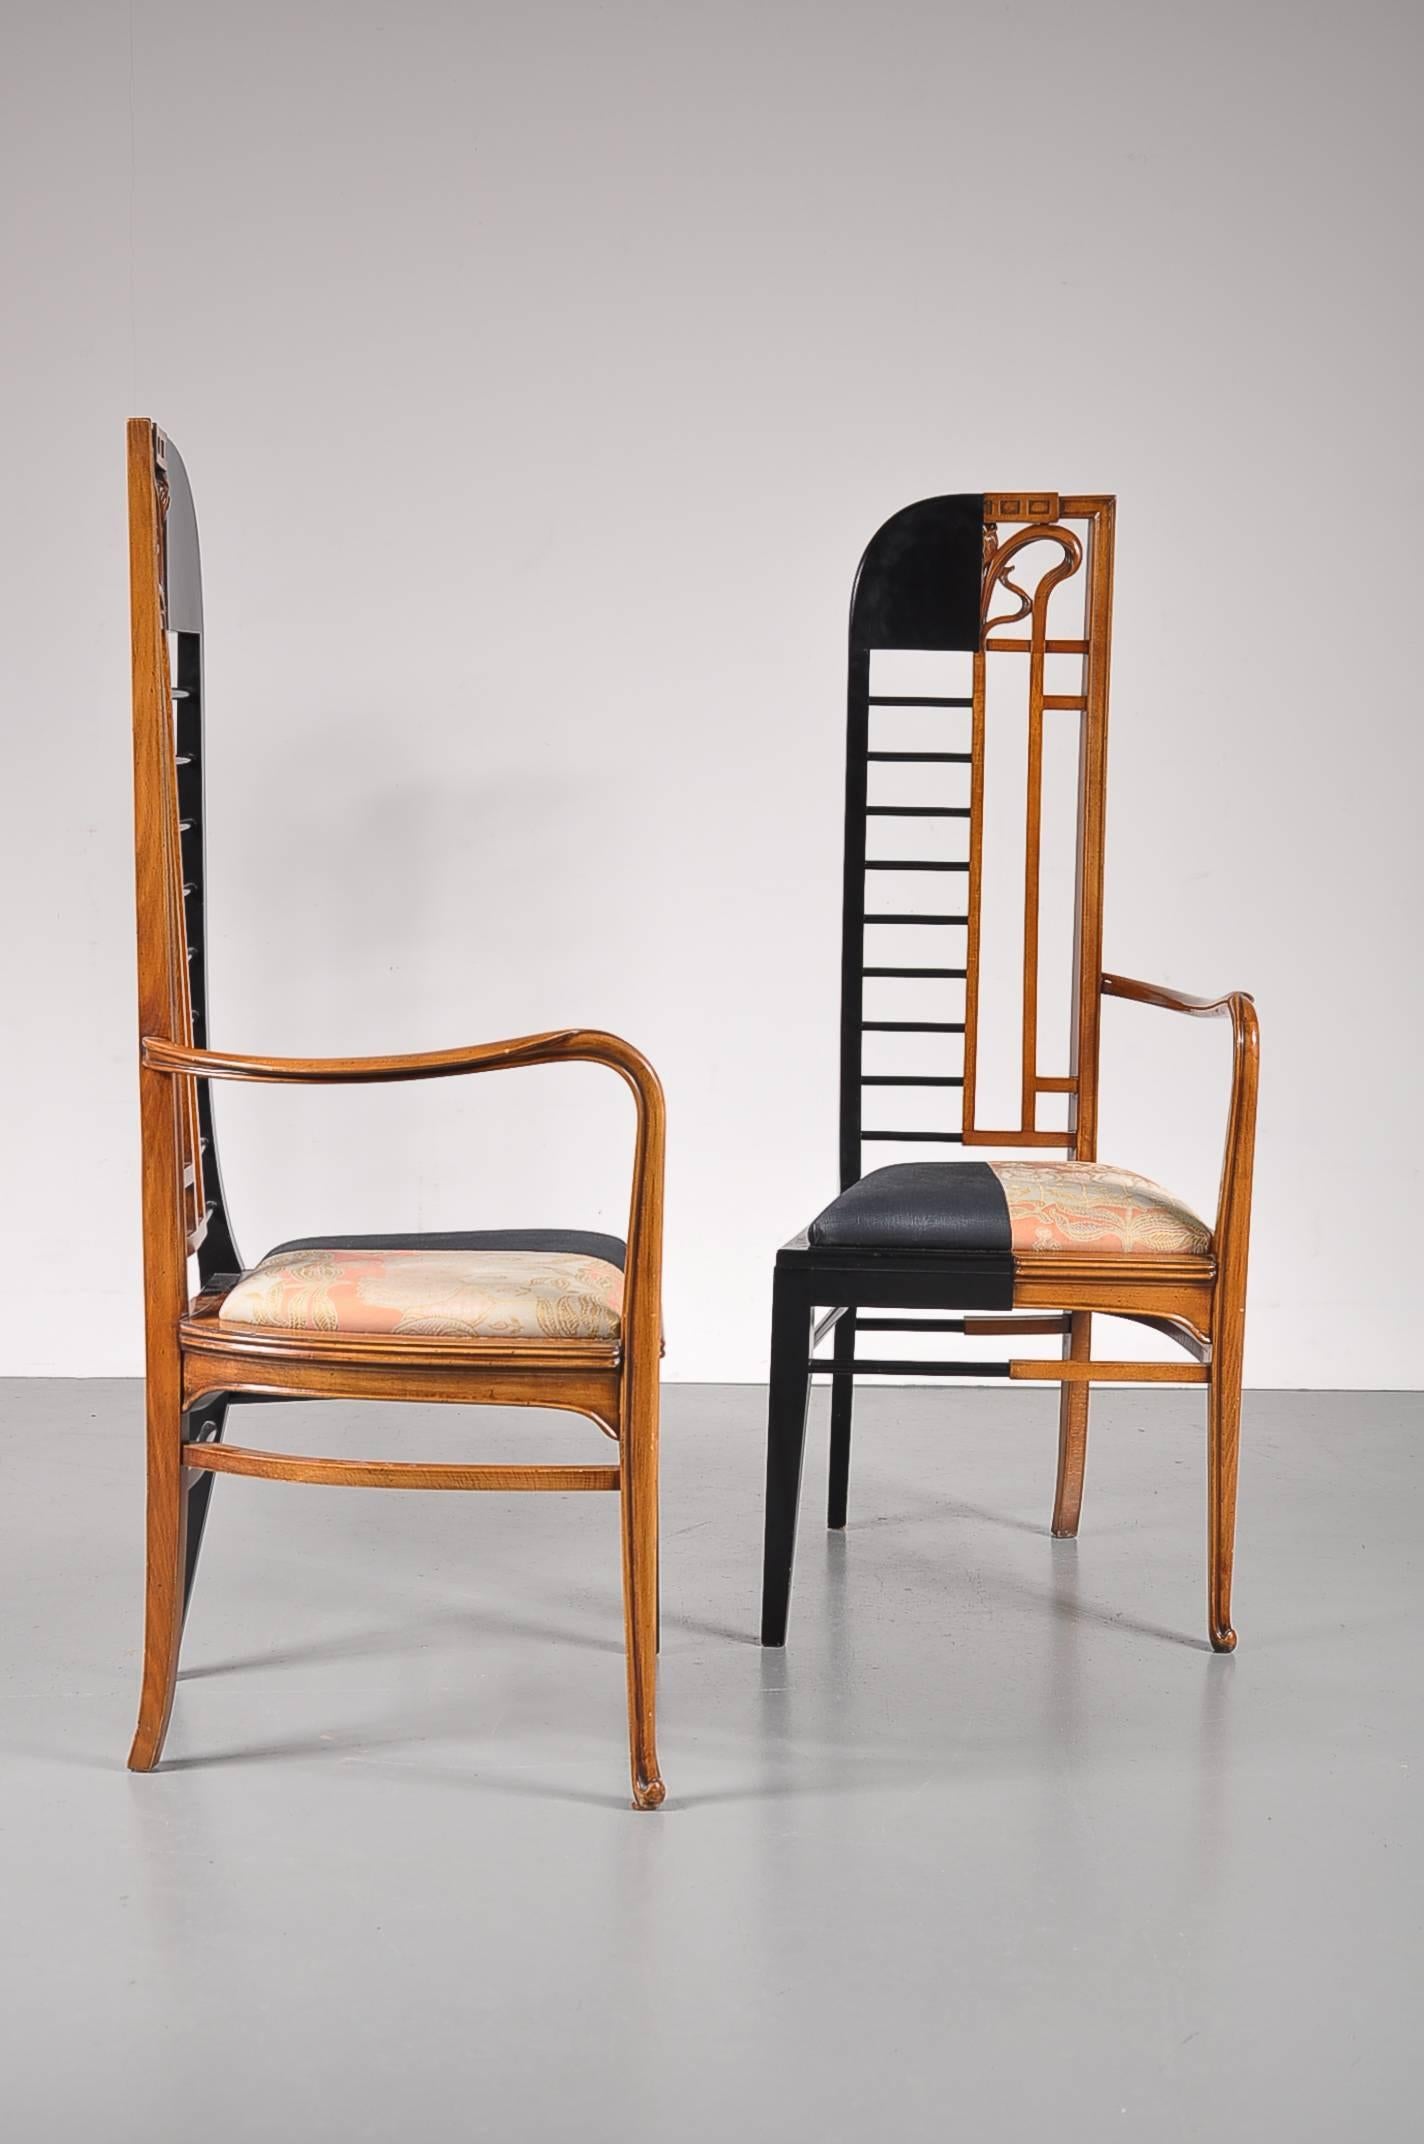 An exceptional pair of chairs that combines two styles in a truly unique way! They were used in a town hall's wedding room. Produced in the Netherlands in the 1980s.

One half of each chair is made from high quality brown colored wood, with